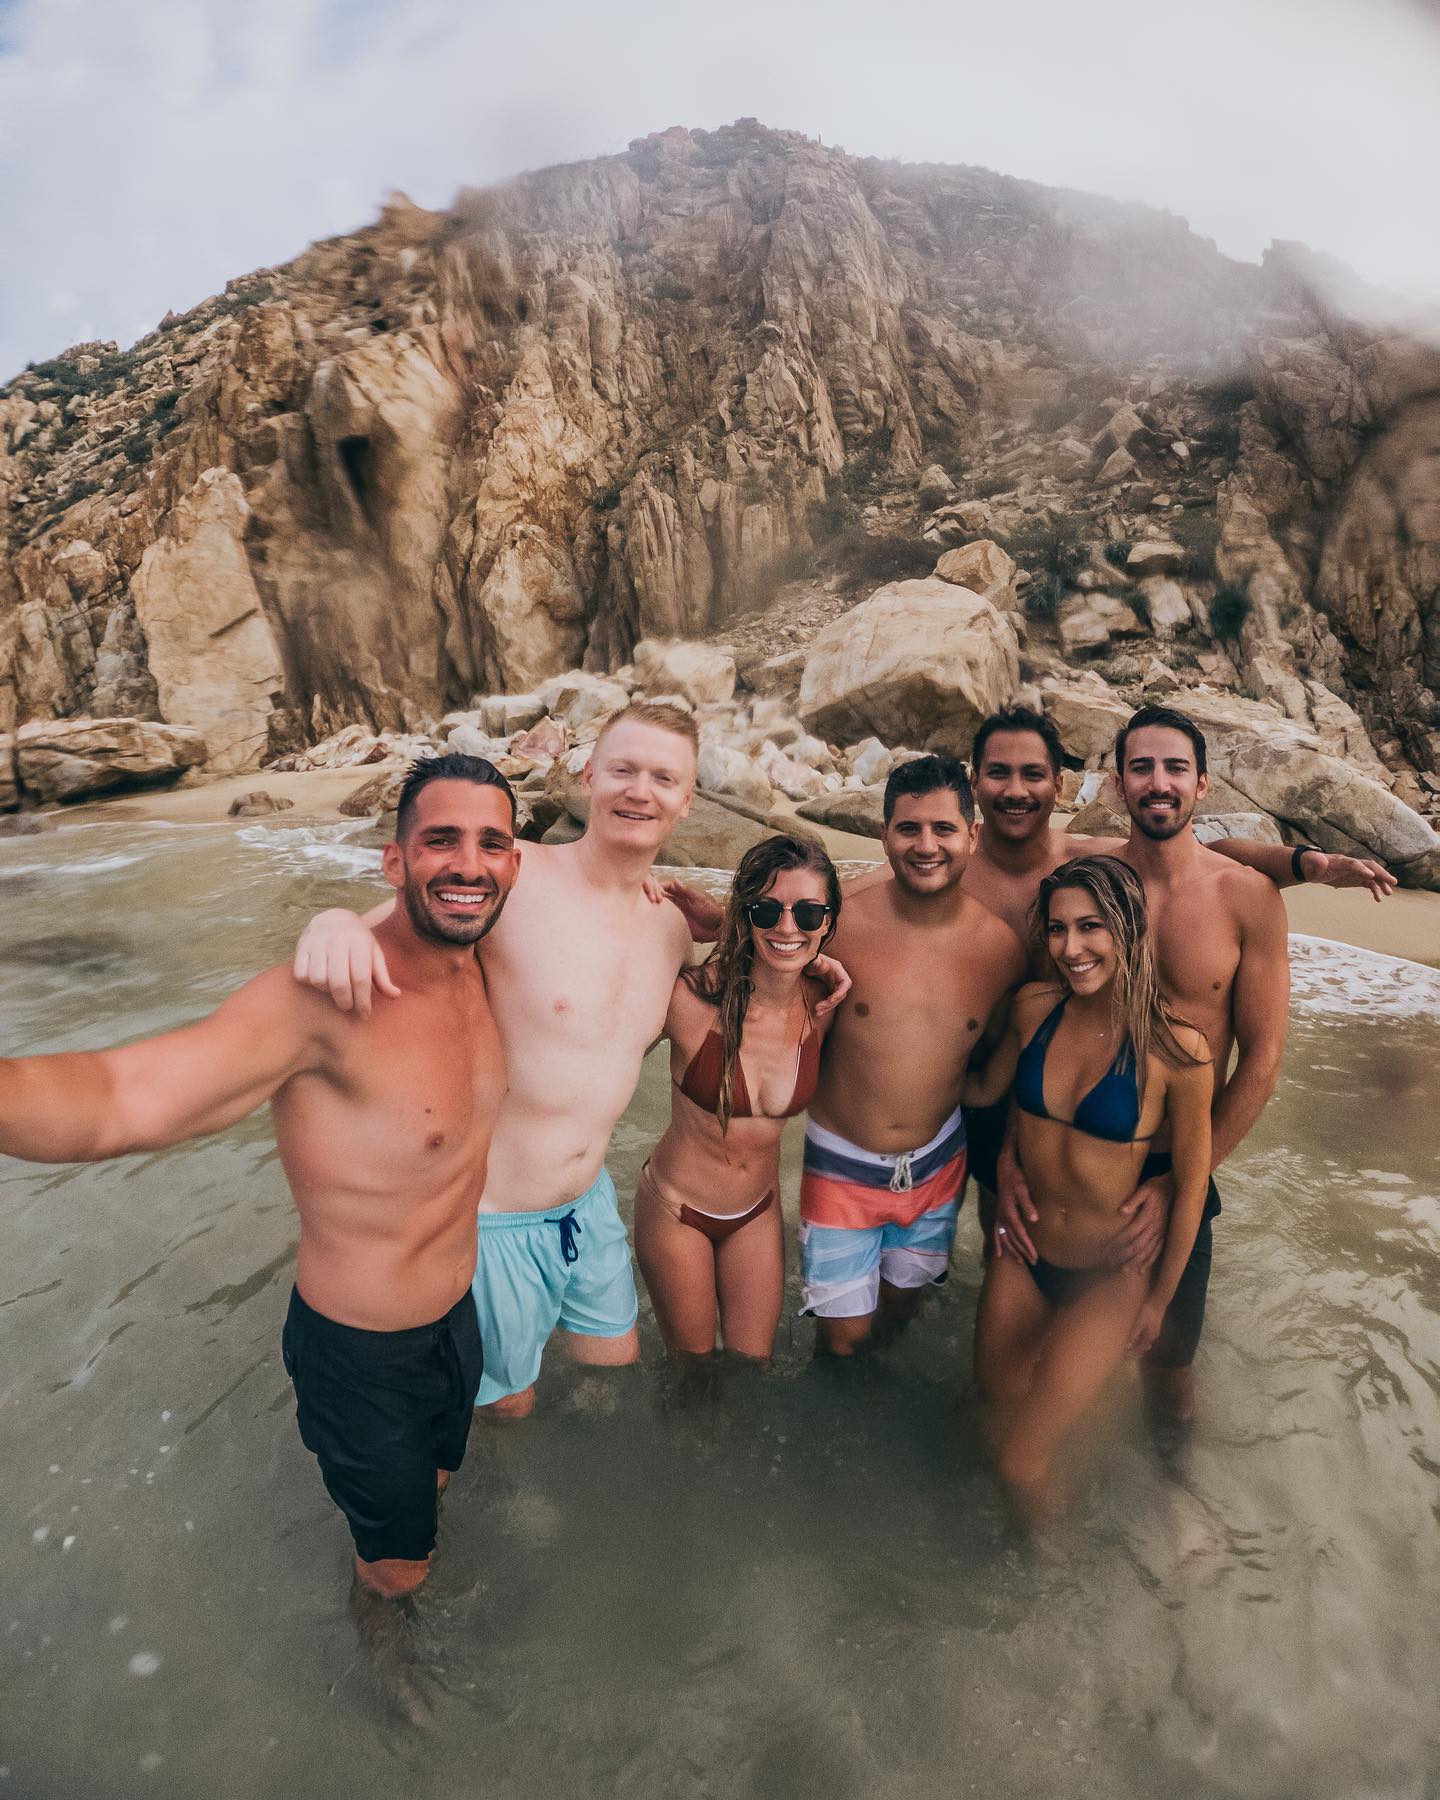 Travel with Friends Captions for Instagram